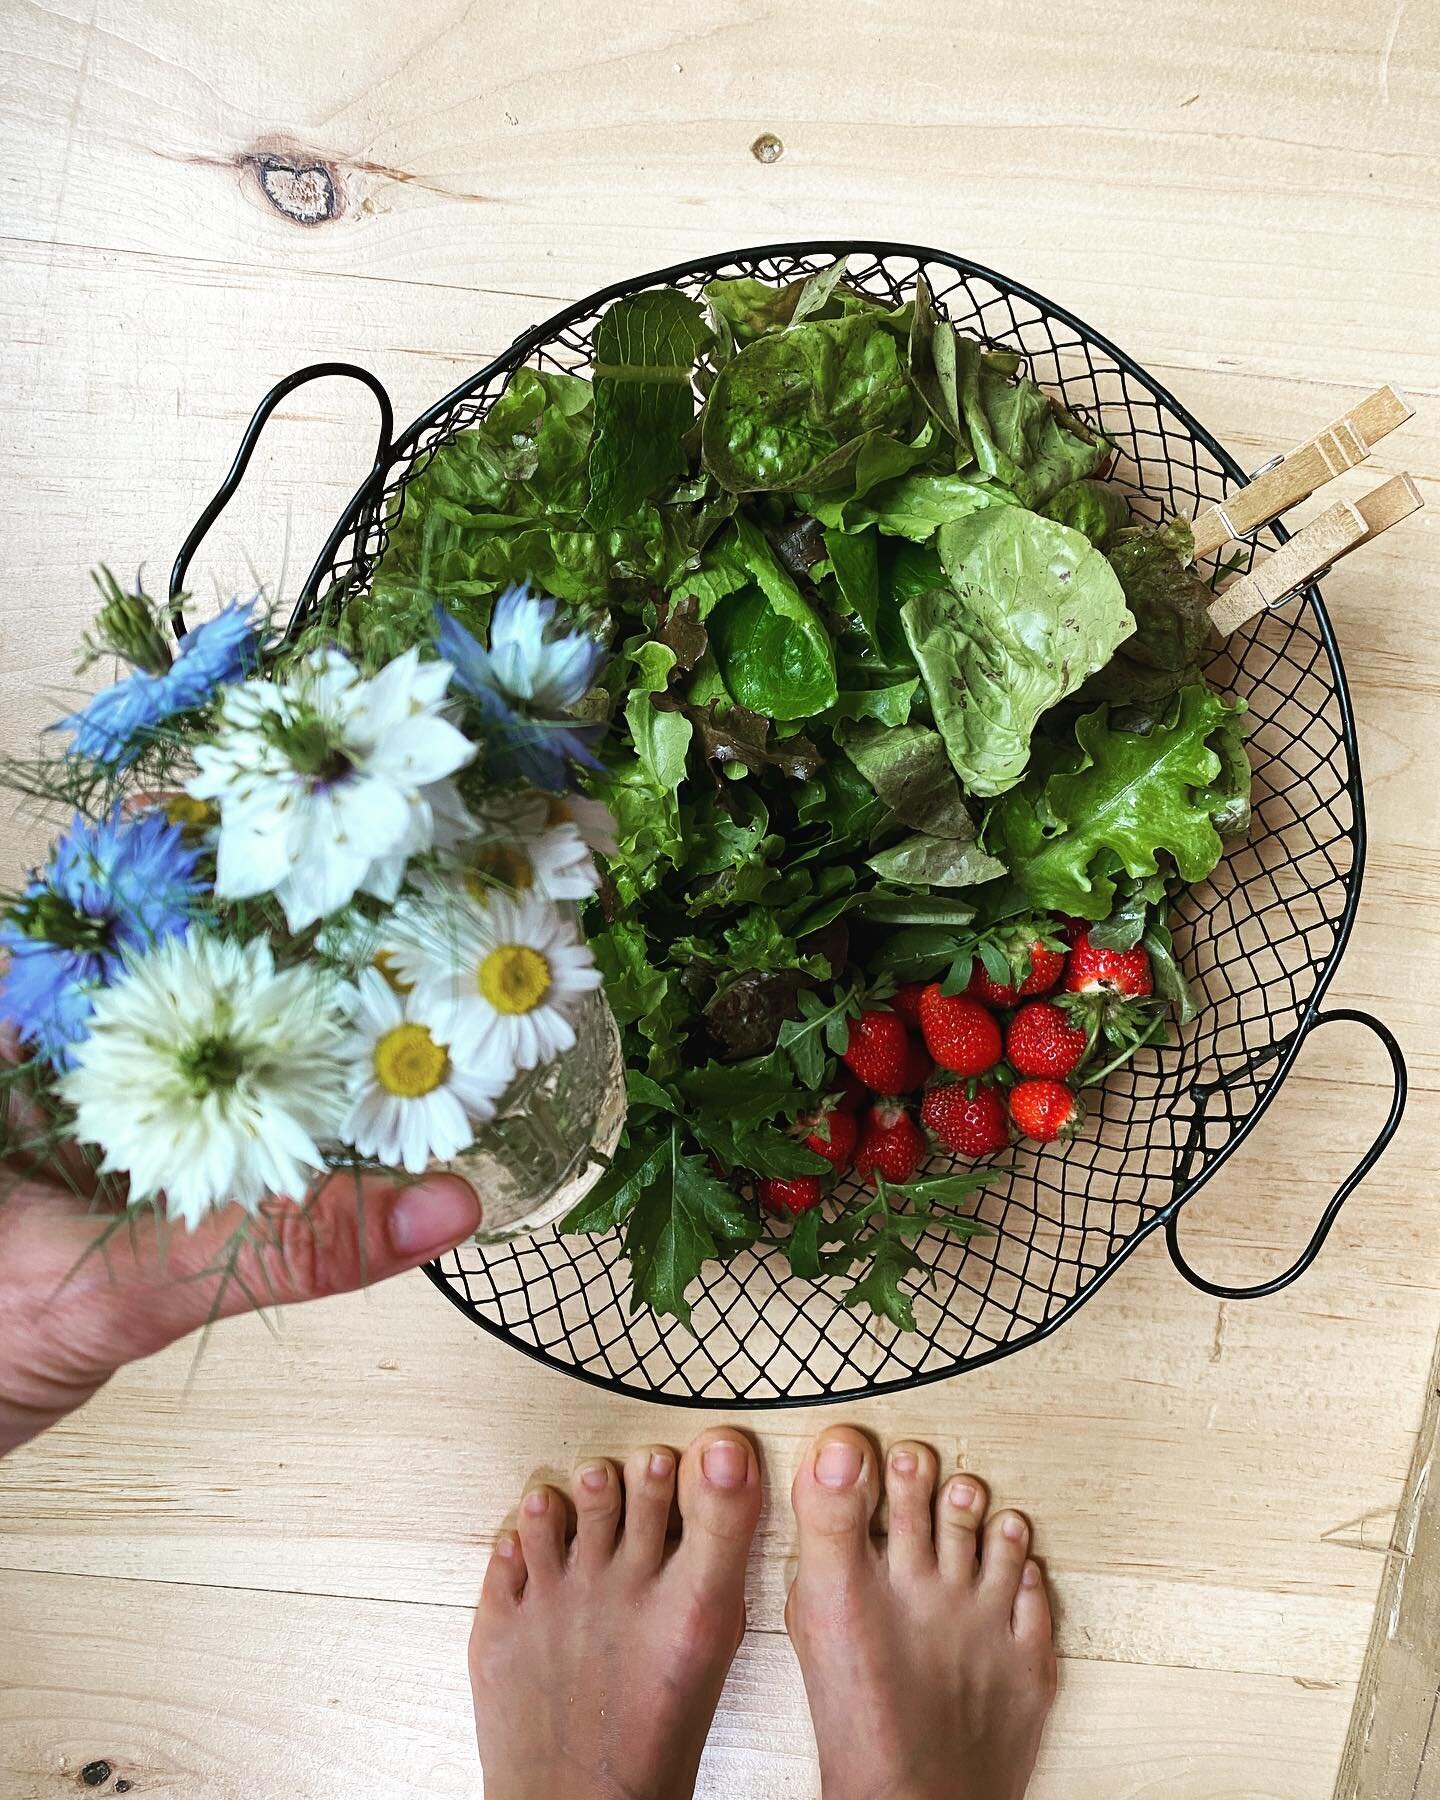 Today&rsquo;s harvest from my front yard garden: love-in-the-mist and chamomile flowers, lettuce, spinach, arugula and strawberries.🍓